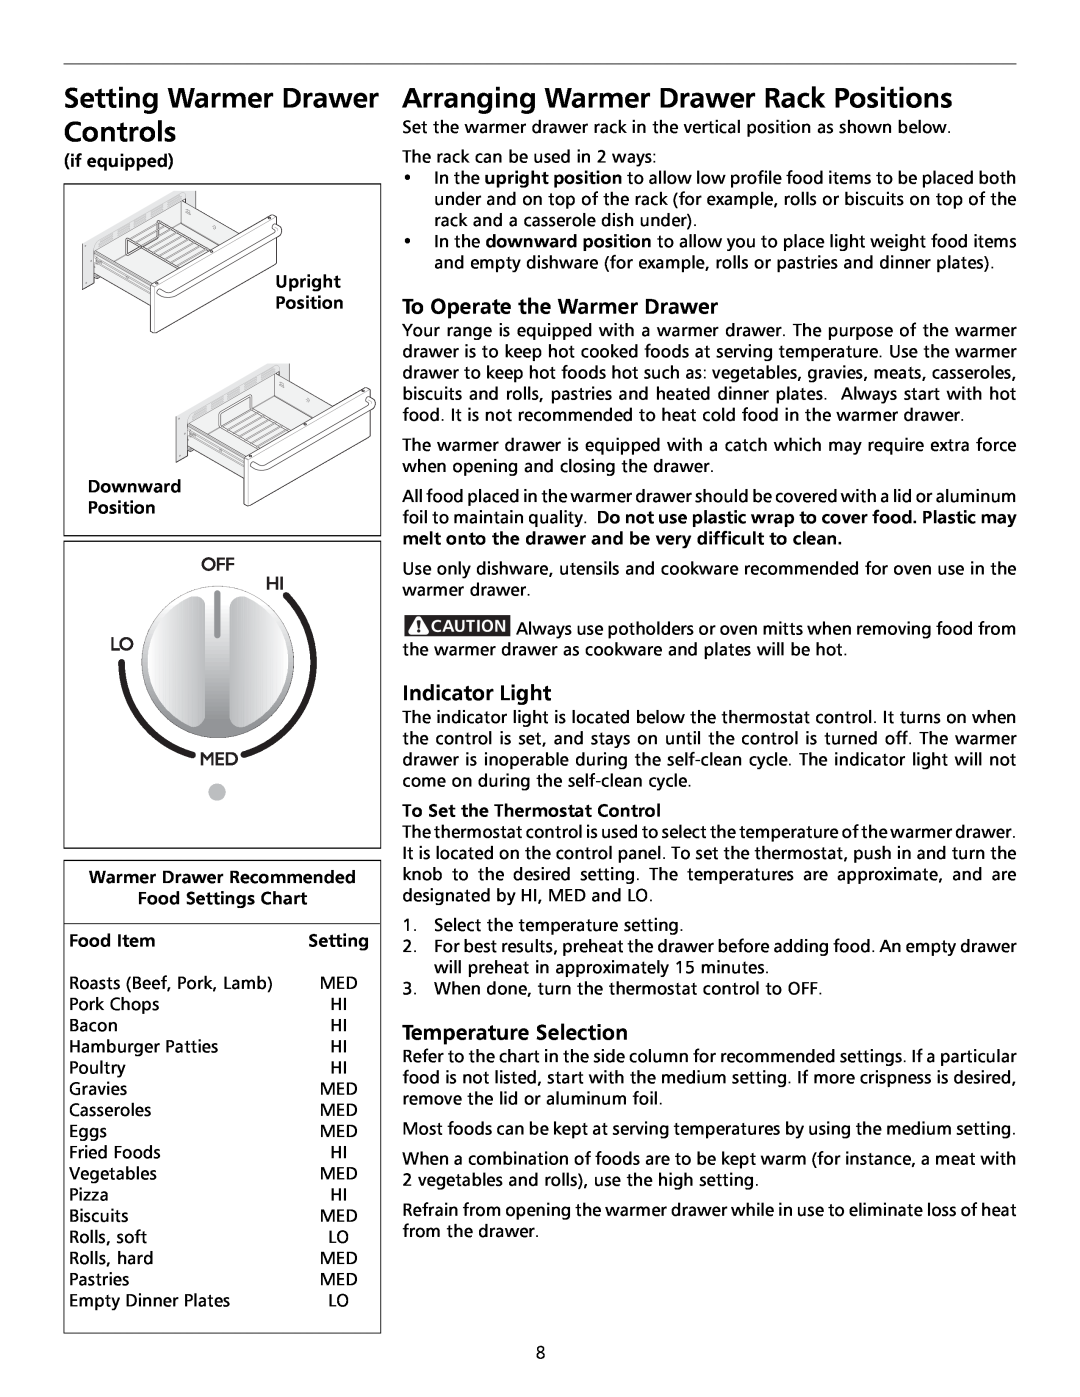 Tappan 316000182 Setting Warmer Drawer Controls, Arranging Warmer Drawer Rack Positions, To Operate the Warmer Drawer 